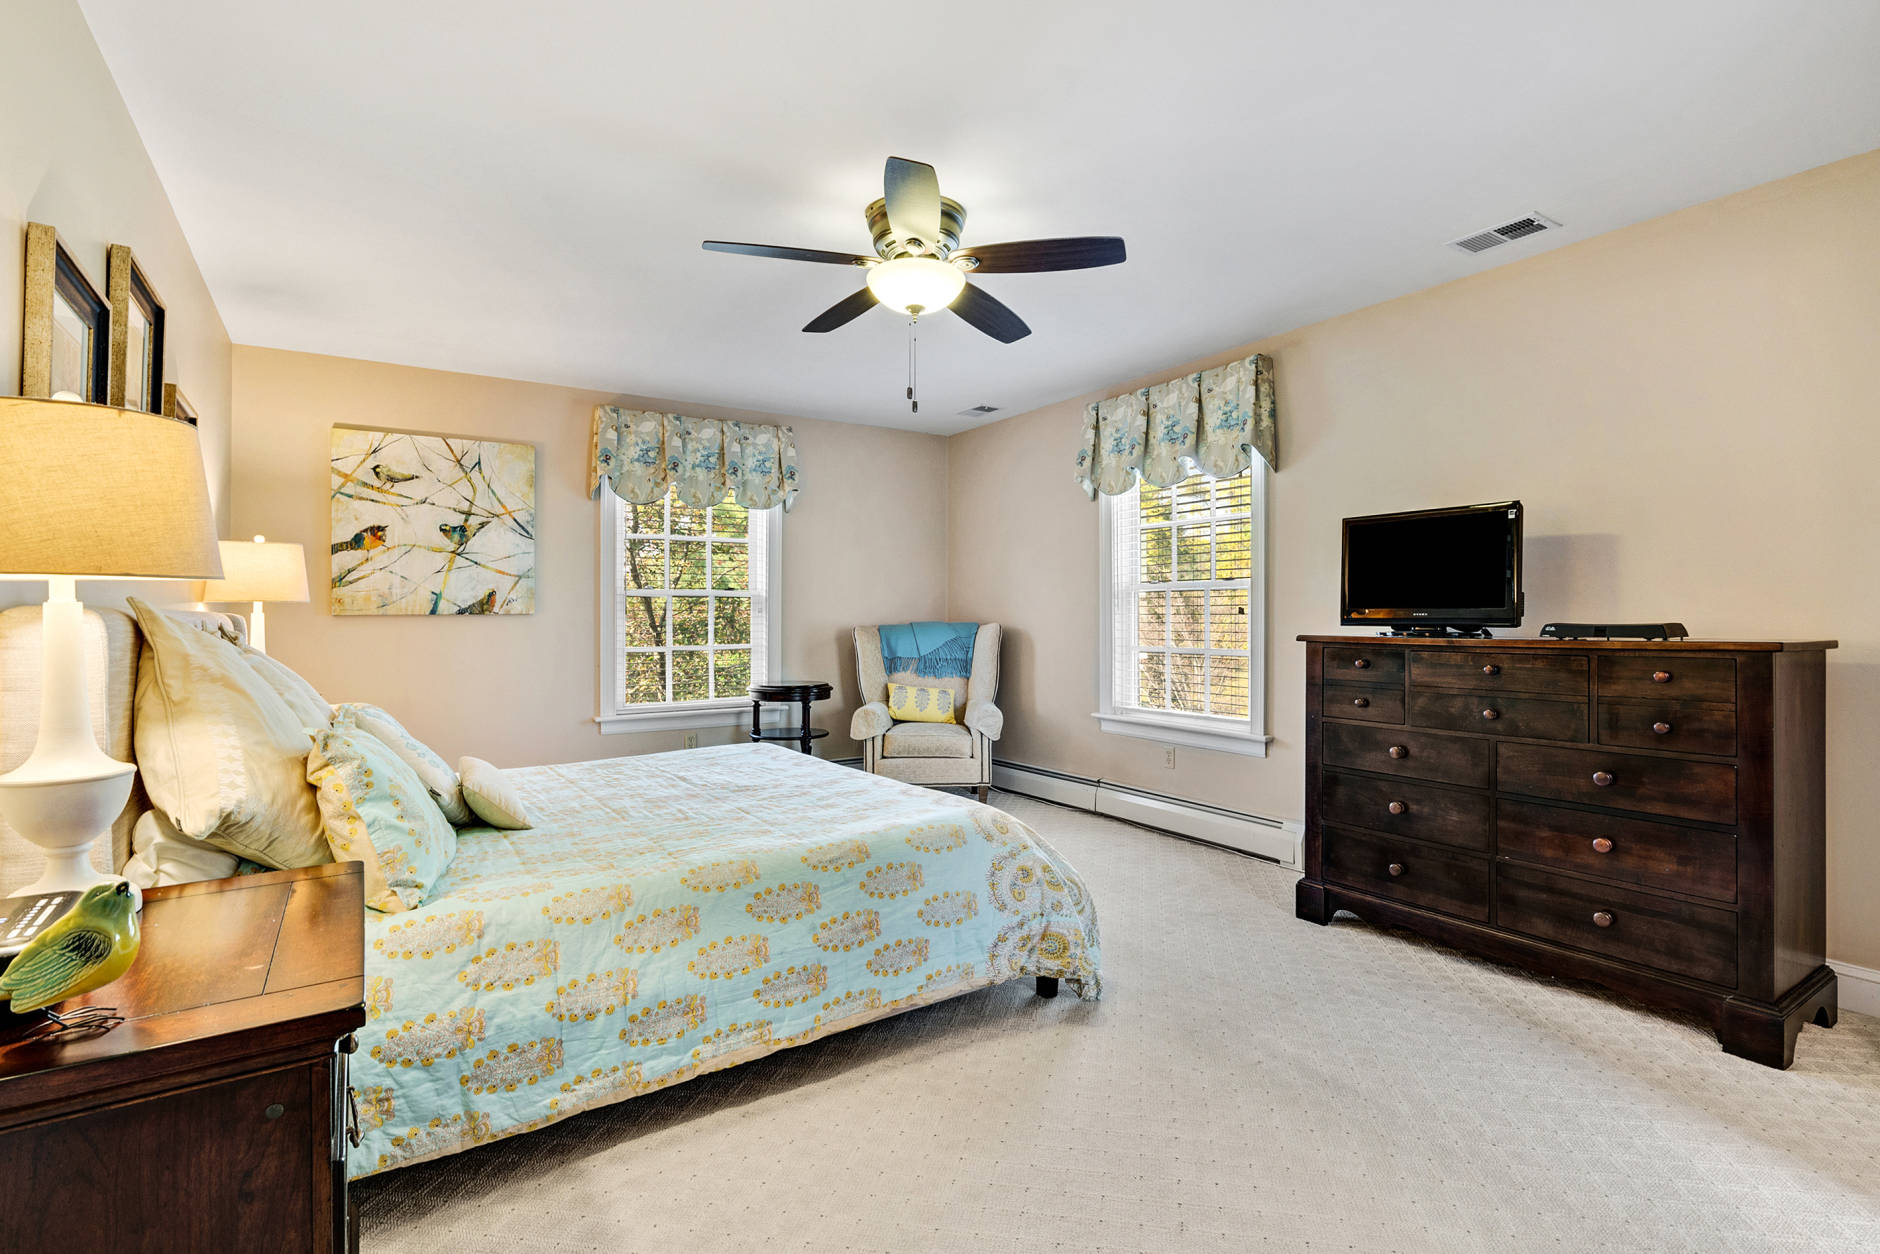 Five of the inn’s six bedrooms are guest suites with in-room bathrooms. (Courtesy Long & Foster Real Estate)